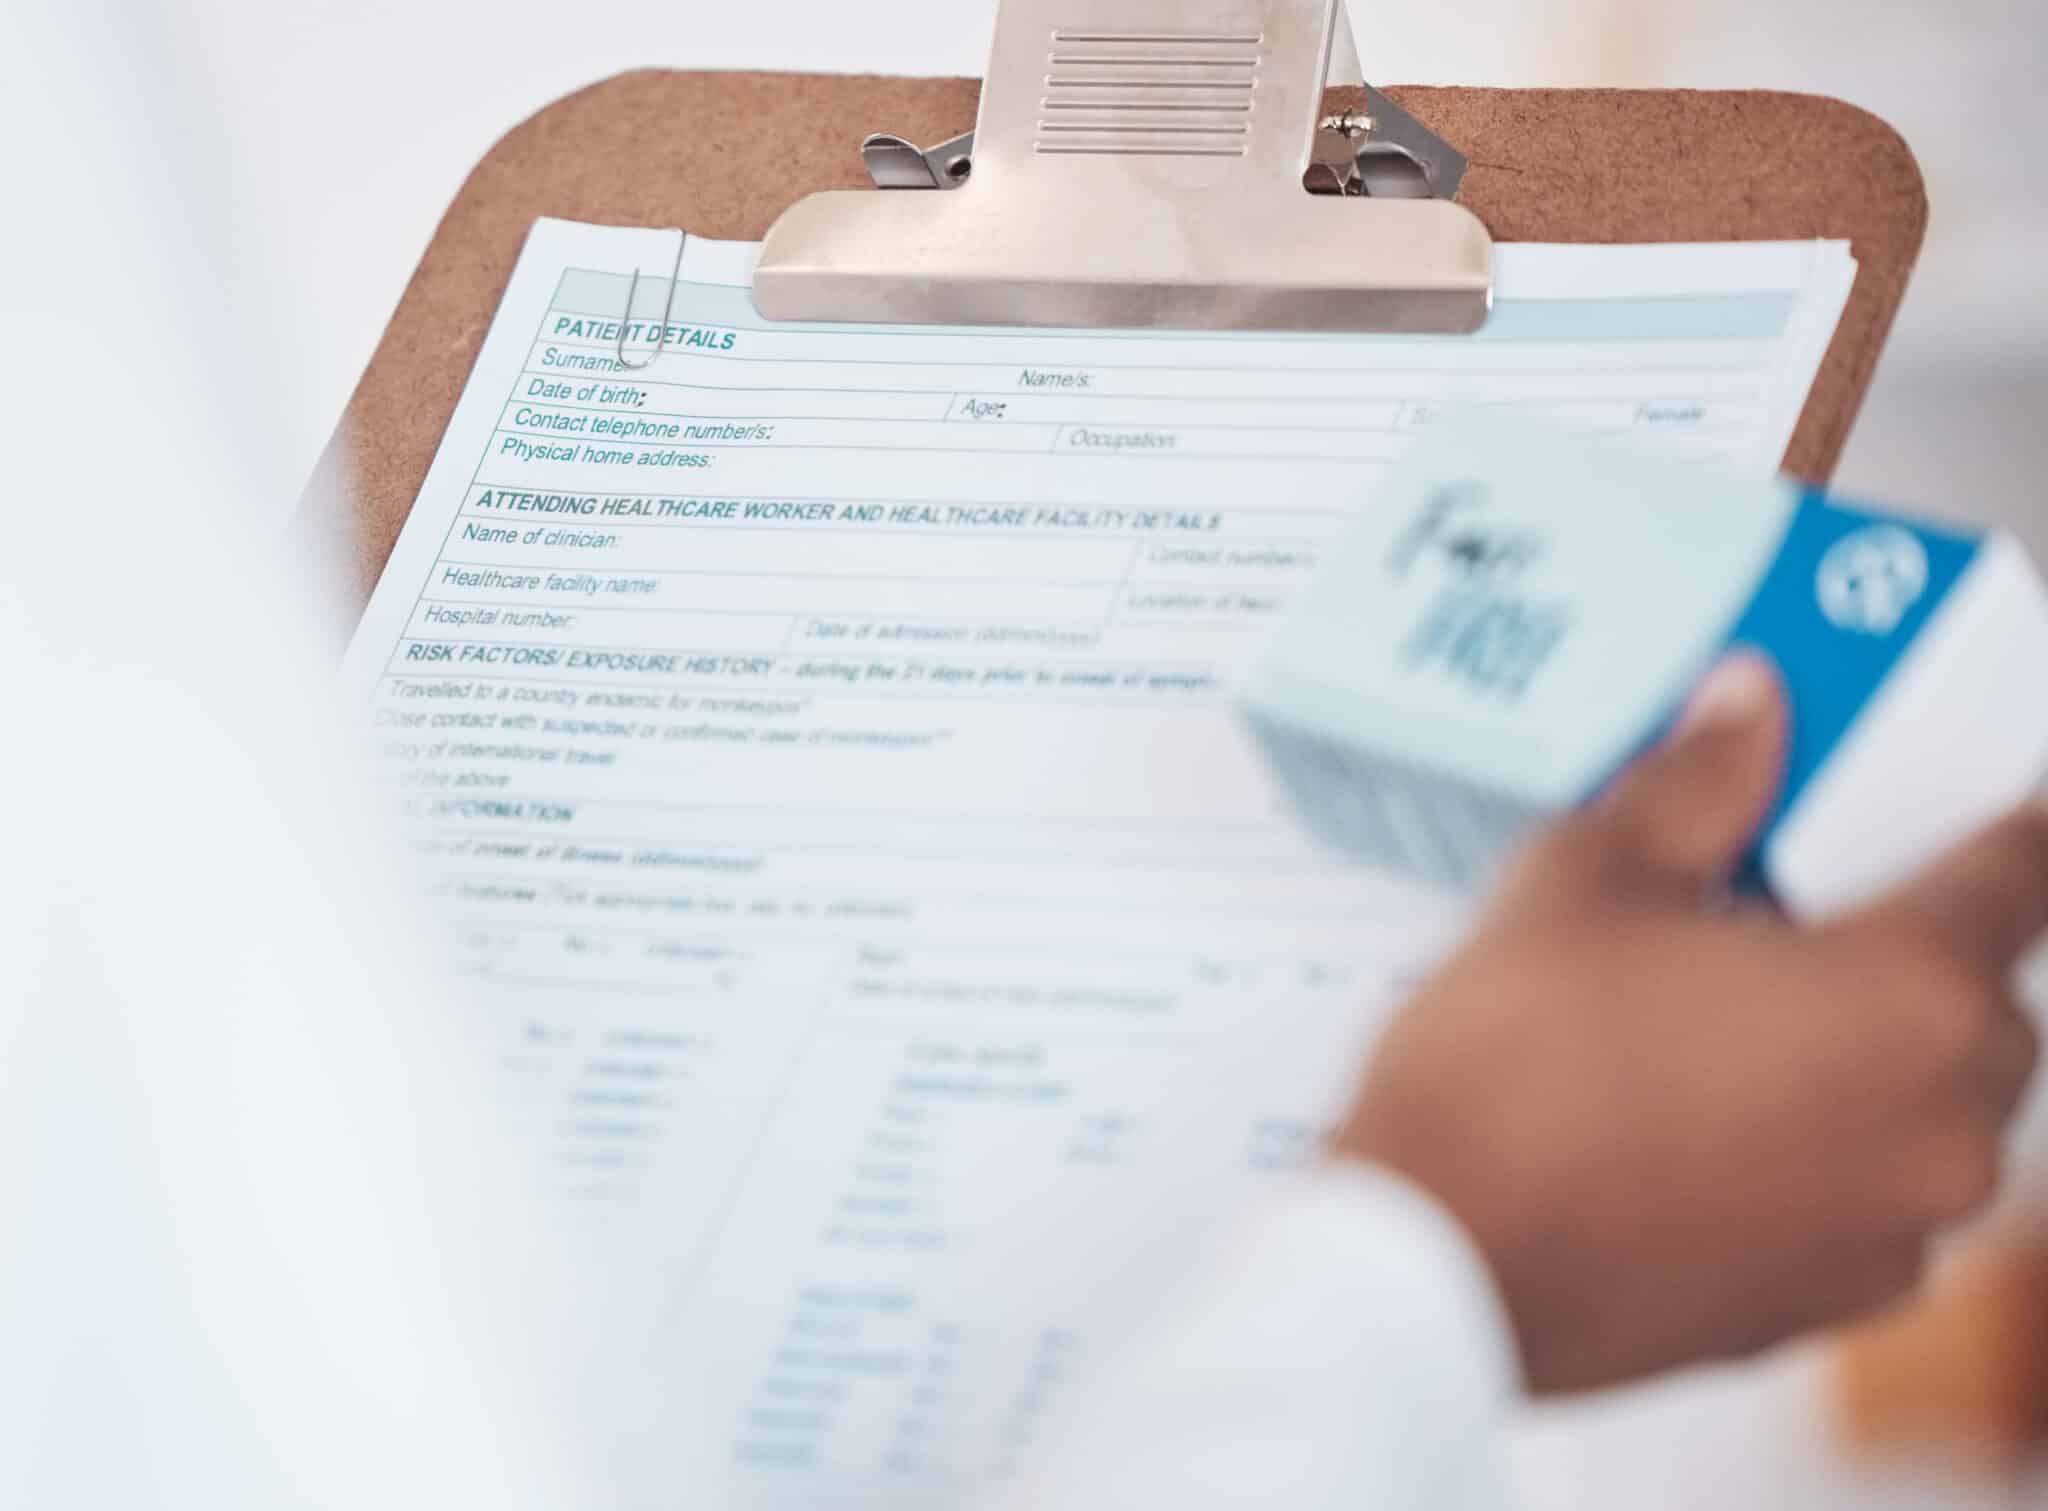 Pharmacist holding a medication box while reviewing a patient safety checklist form